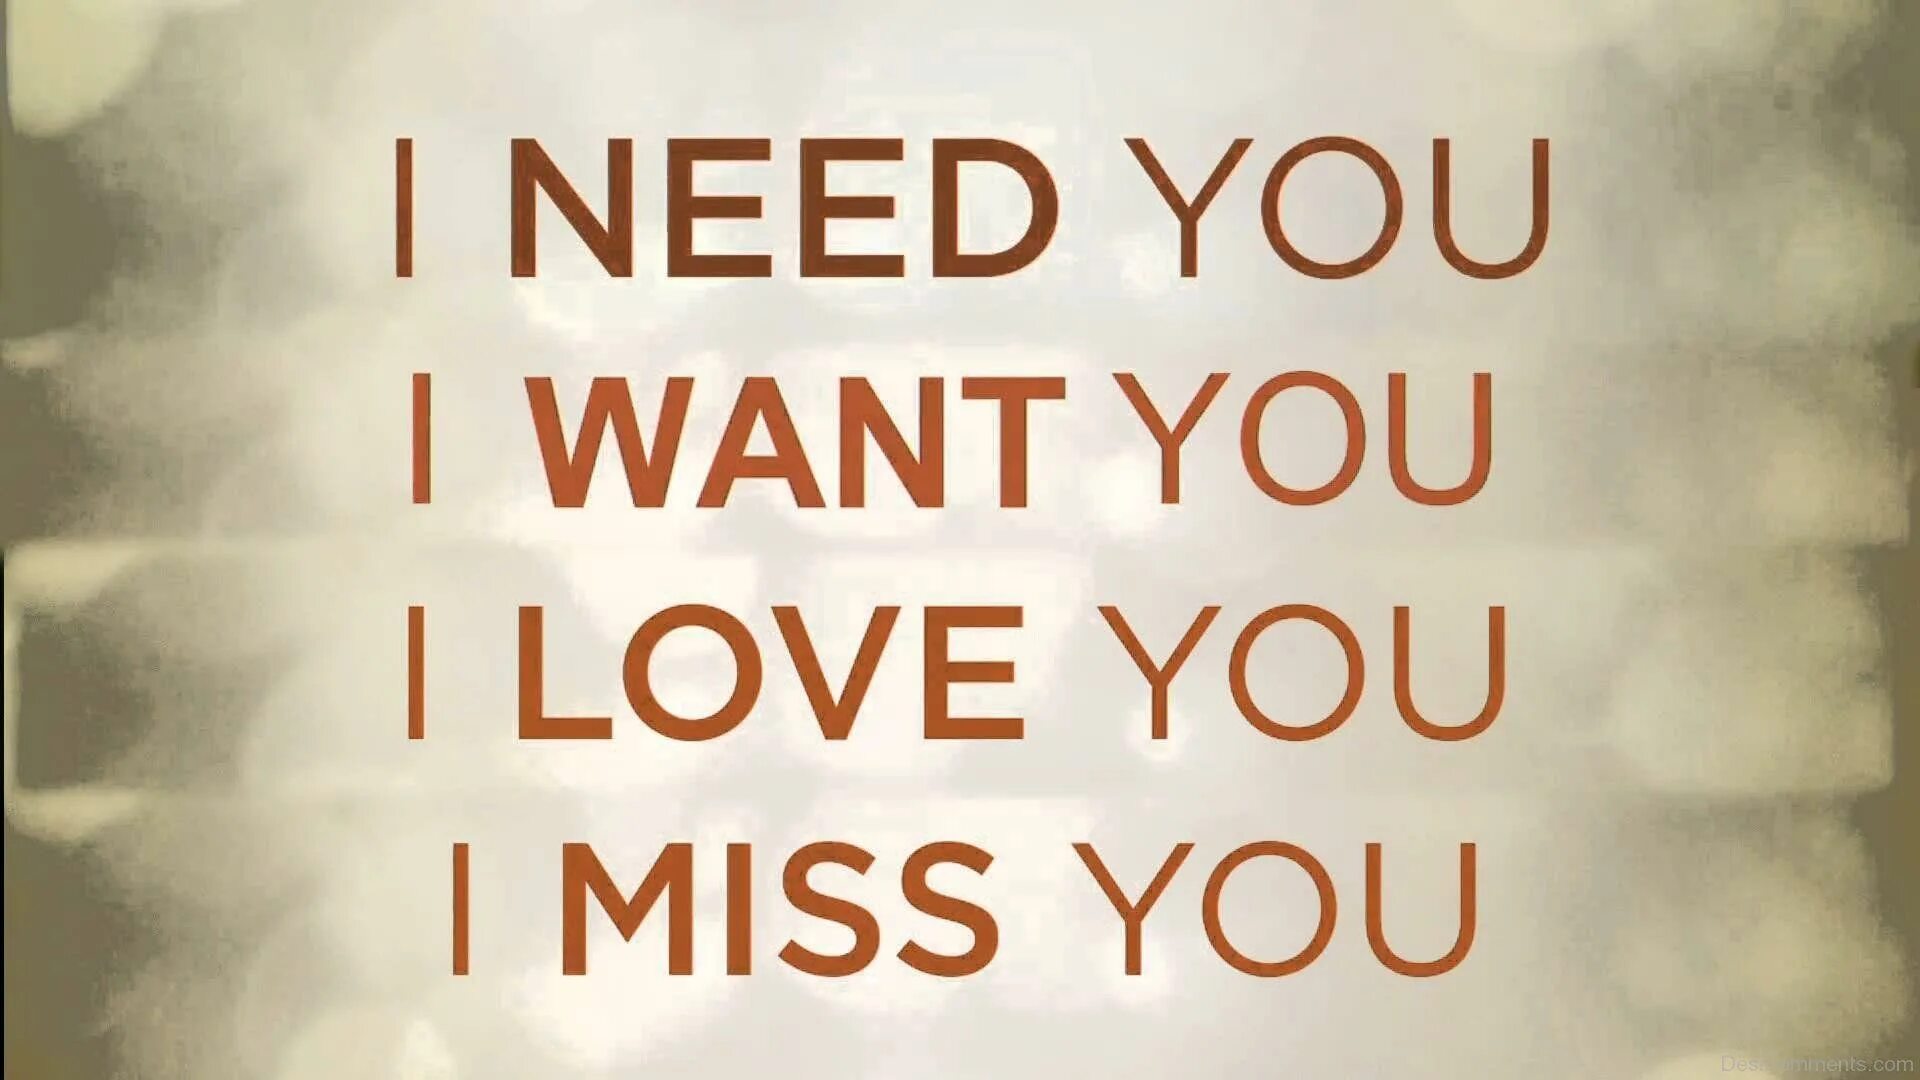 I need you i Miss you i want you. I Love you. I Love you i need you. Need you надпись. Please stay i need you